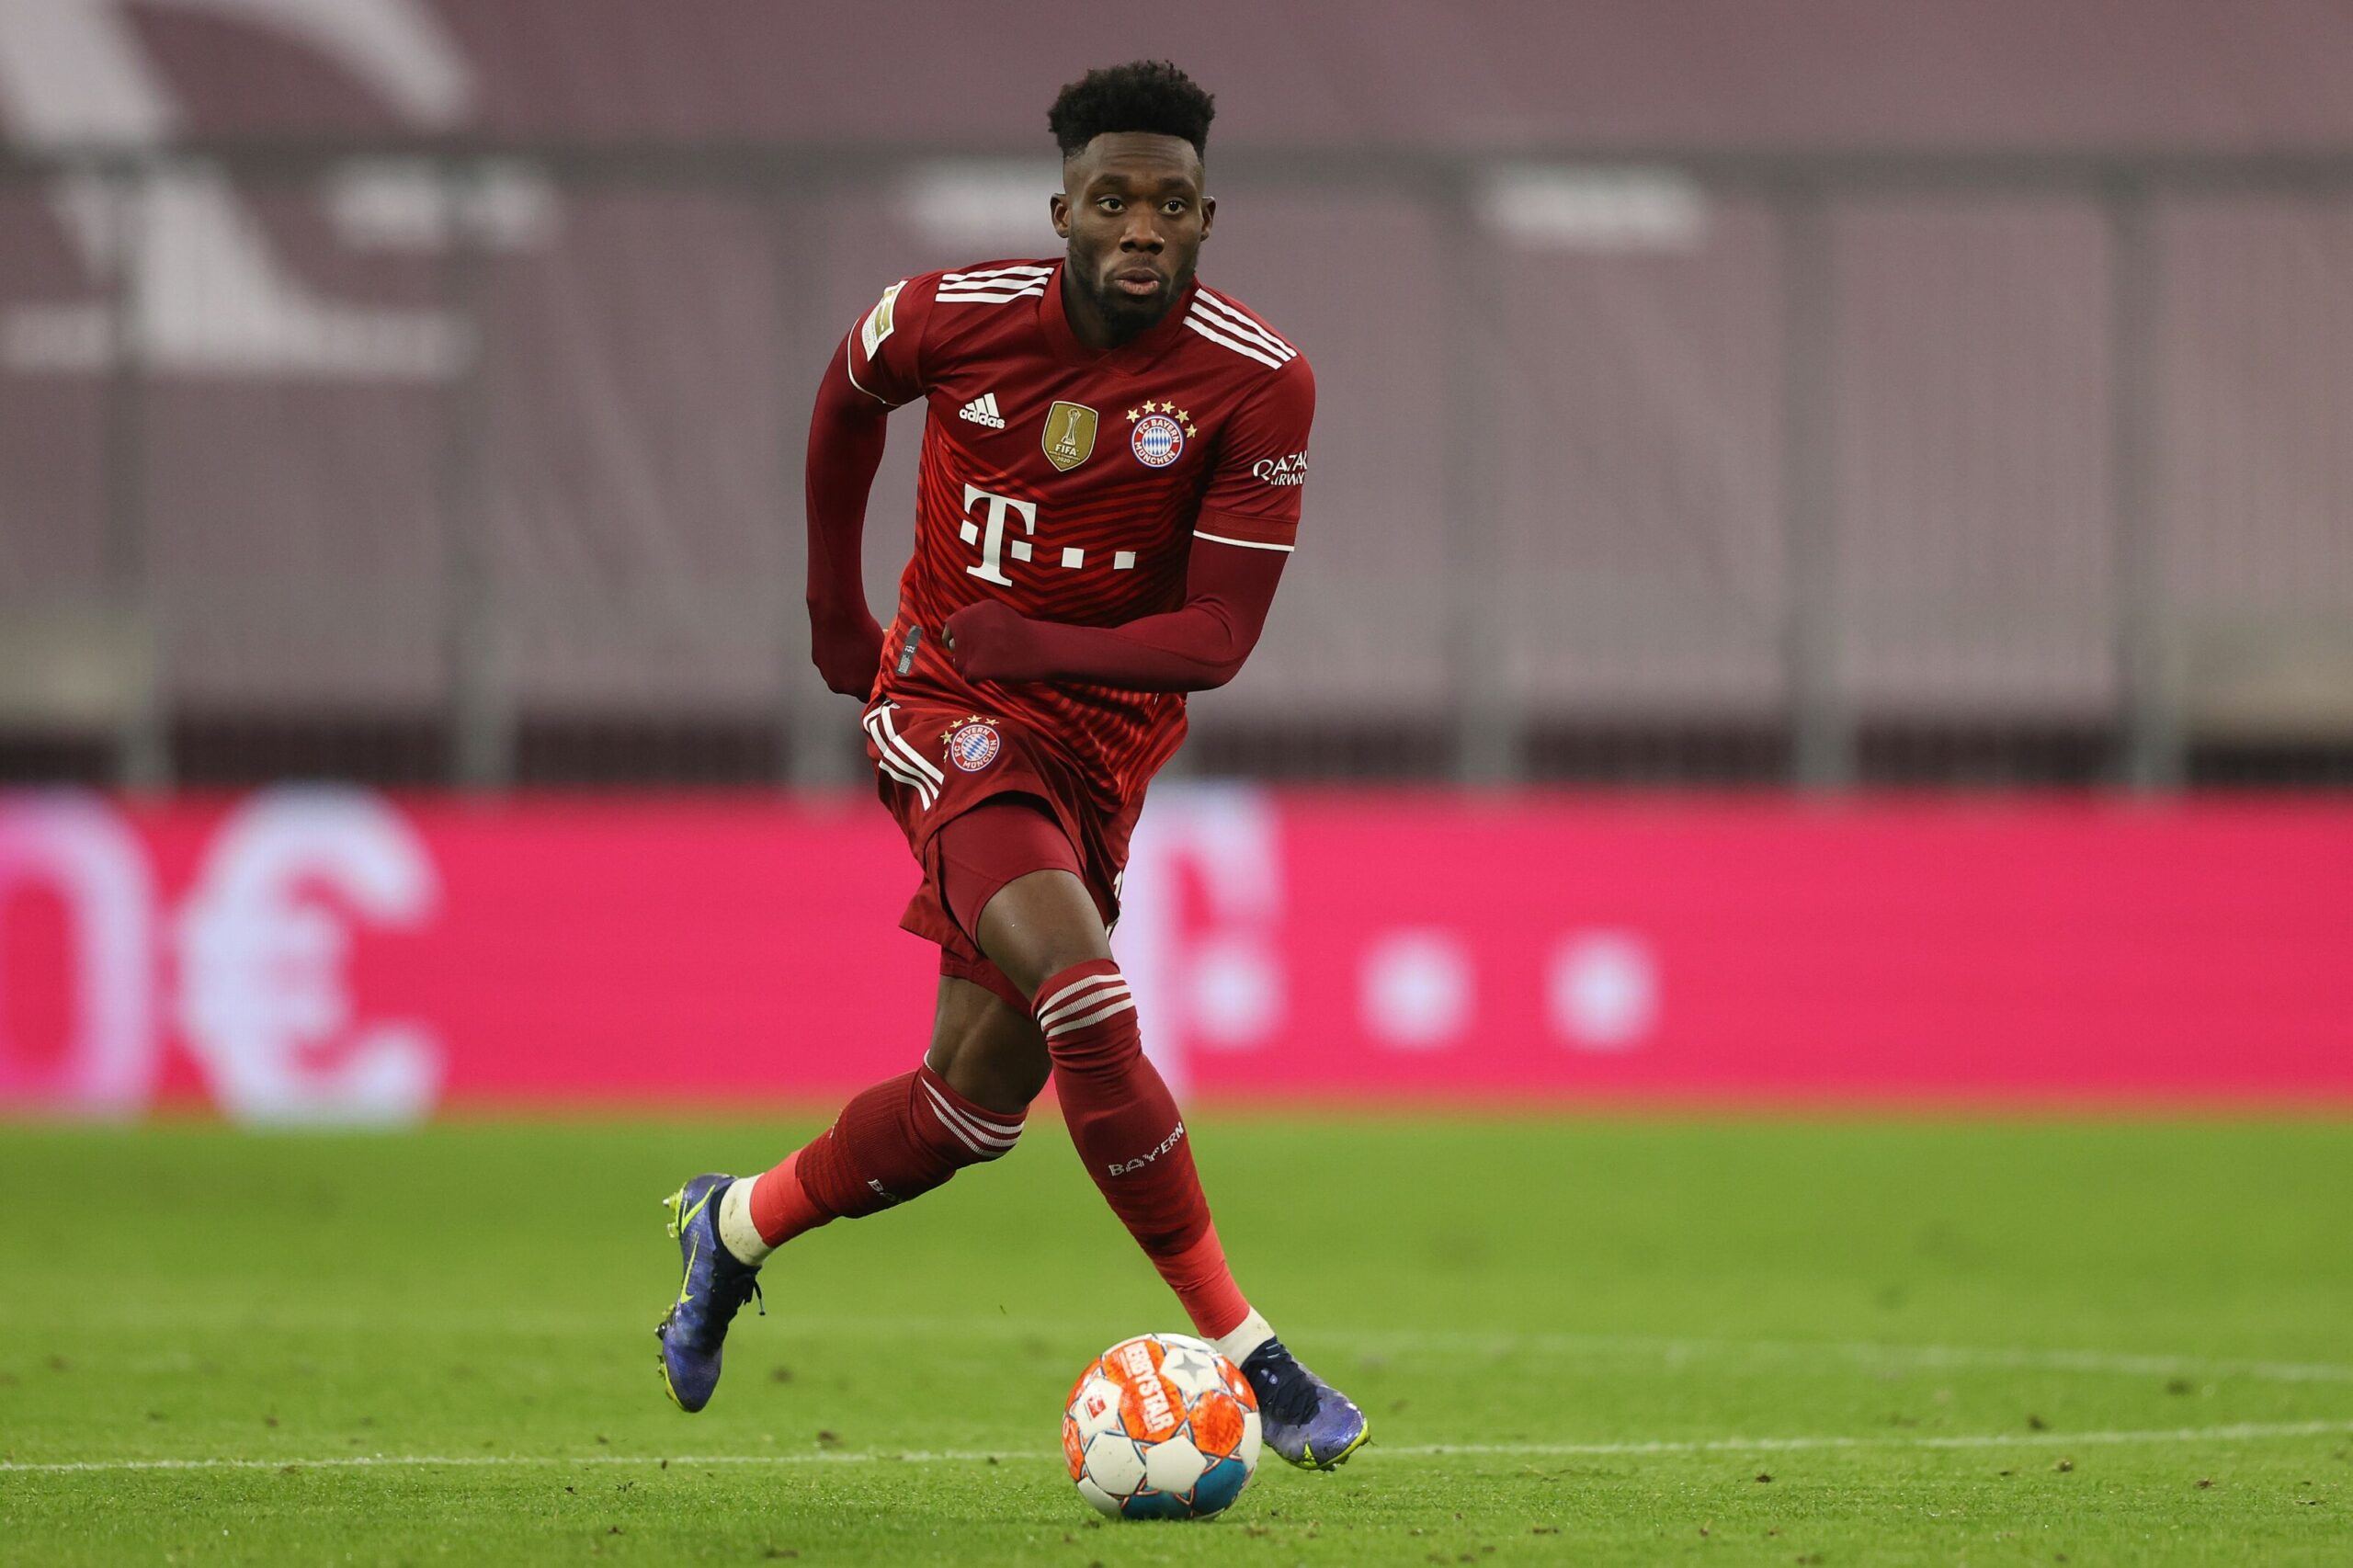 Alphonso Davies Transfer News: Is he moving to Real Madrid?